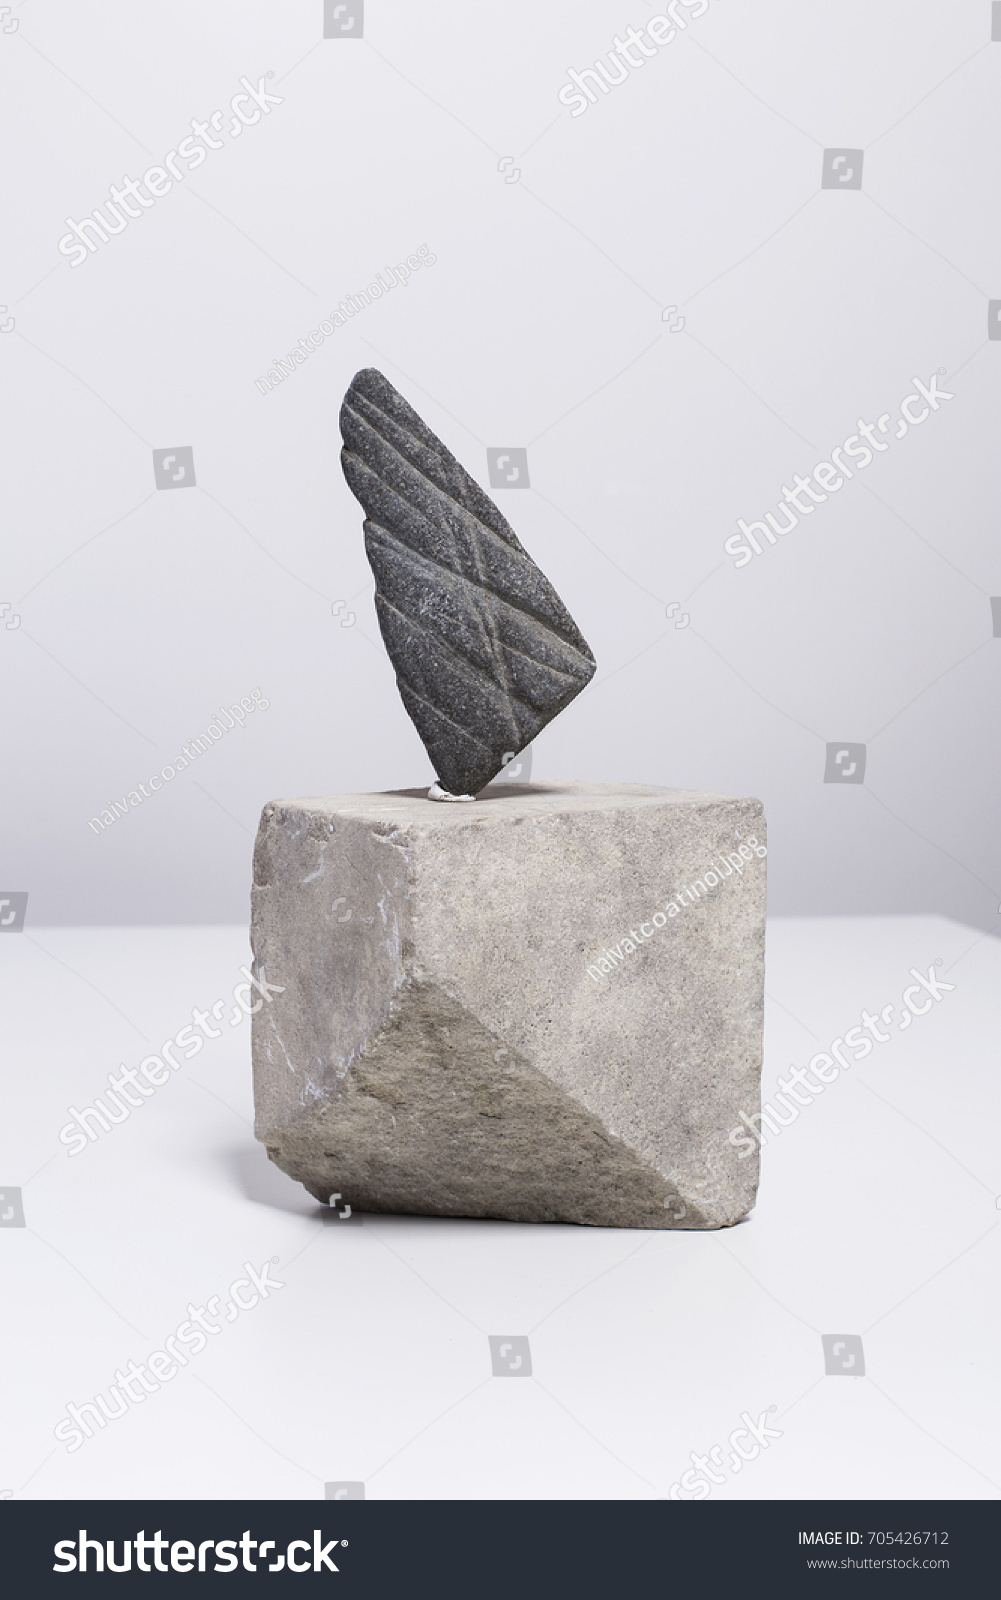 Creative arrangement, minimalistic home decor with sculpture made of river stone #705426712